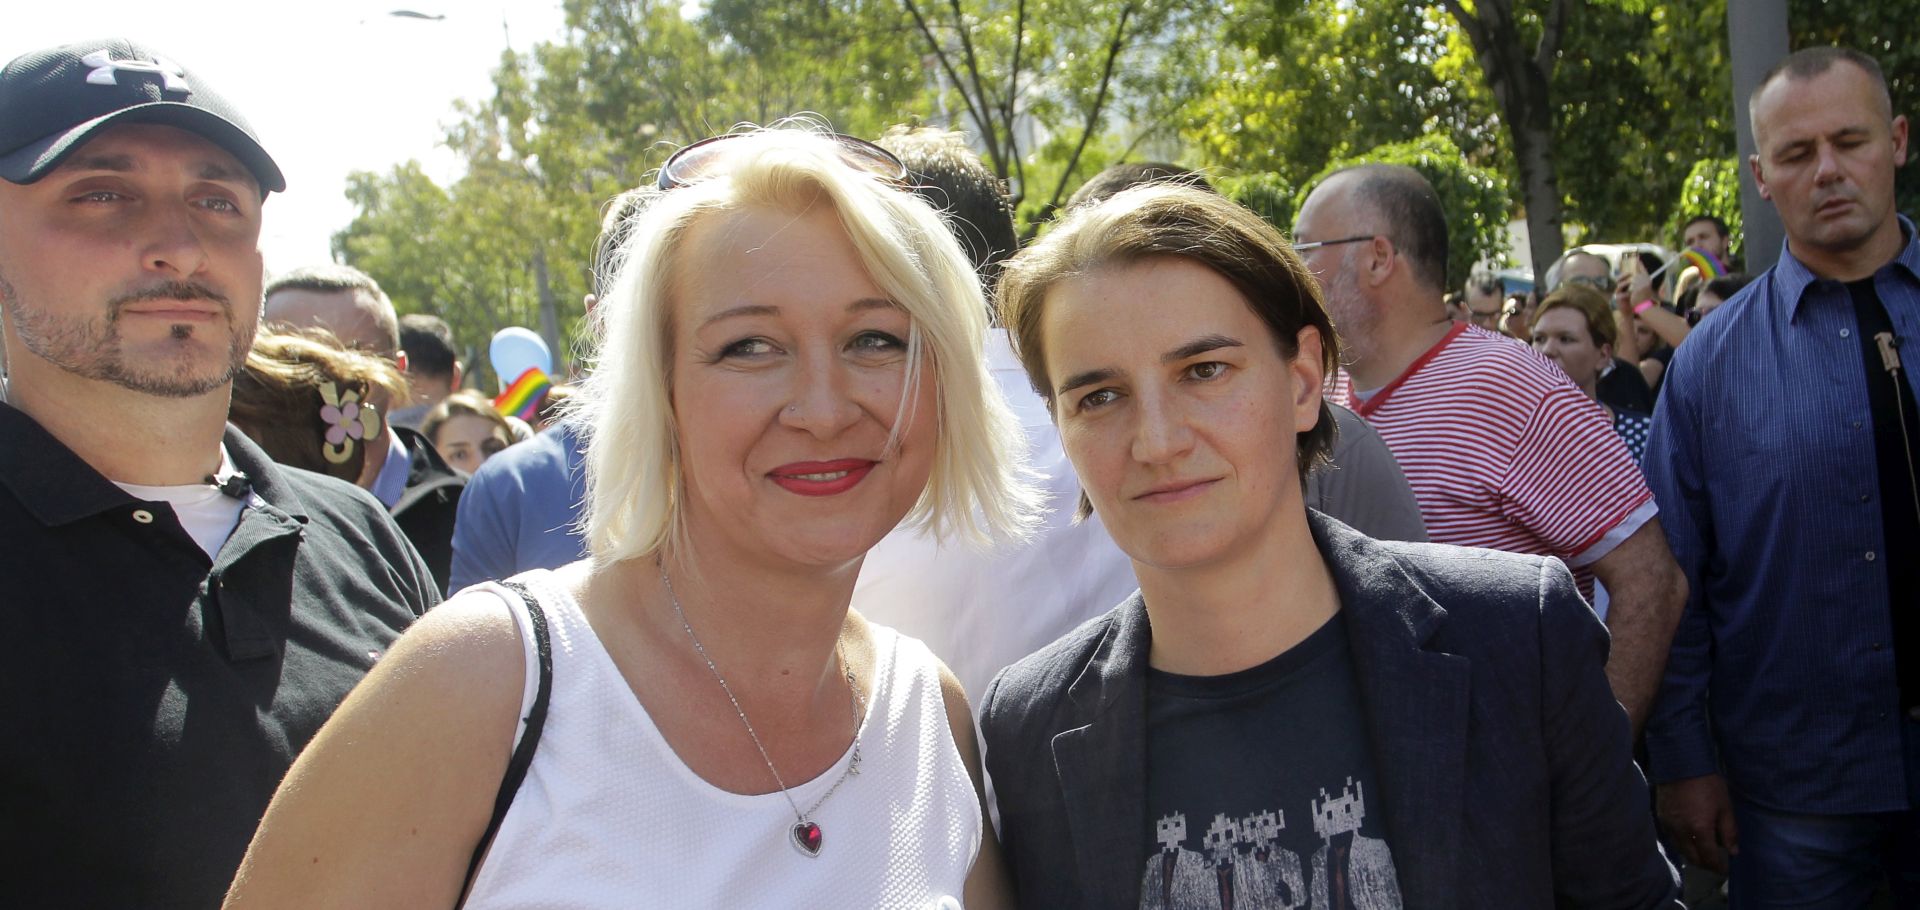 epa06210023 Serbian Prime Minister Ana Brnabic (C-R) poses for a photo with Helena Vukovic (C-L), a transgender former Serbian Army officer, at the Belgrade Pride Parade march in Belgrade, Serbia, 17 September 2017. Others are not identified. Holding rainbow colored flags, balloons and banners with slogans such as 'For change' pride participants marched through the main streets of Serbia's capital in a rally supported by ILGA-Europe - the European Region of the International Lesbian, Gay, Bisexual, Trans and Intersex Association (ILGA).  EPA/ANDREJ CUKIC